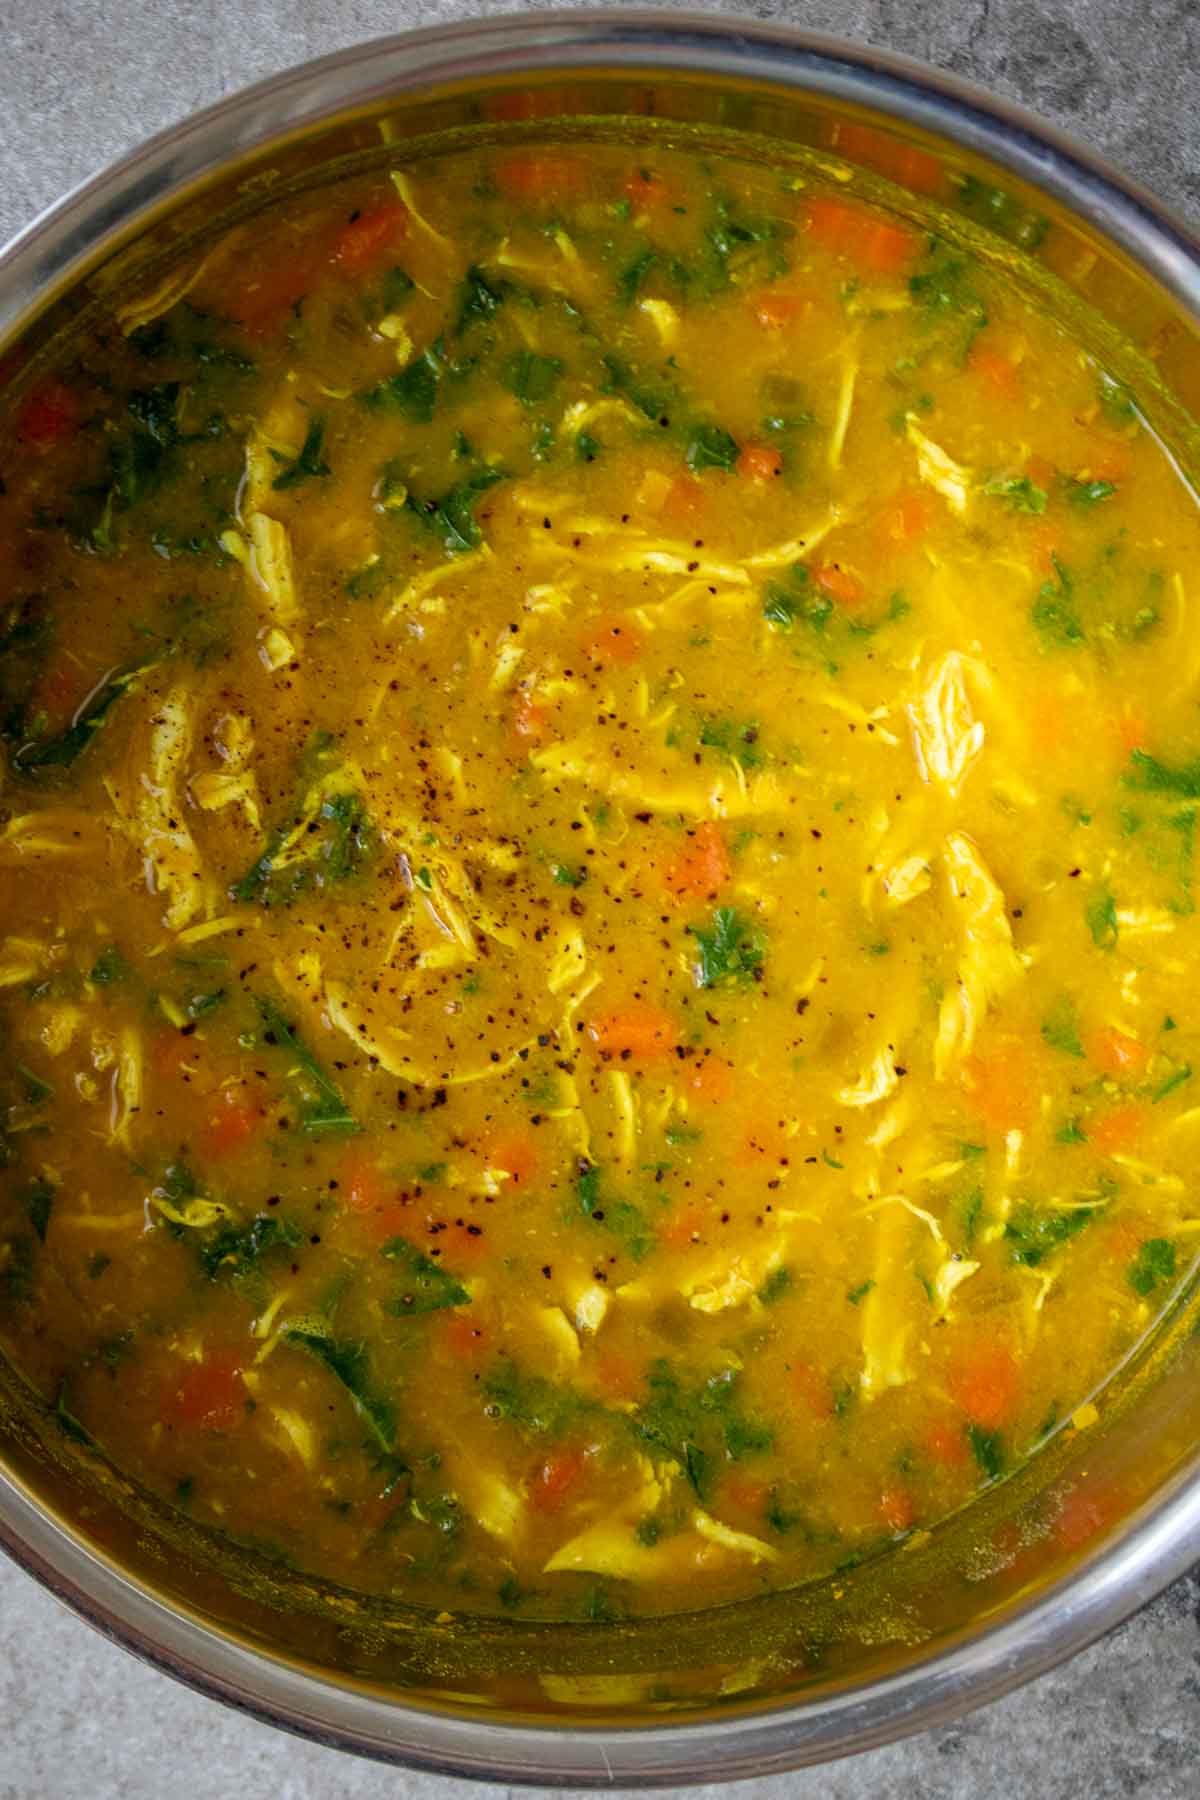 Cooked chicken lentil soup in a large pot.